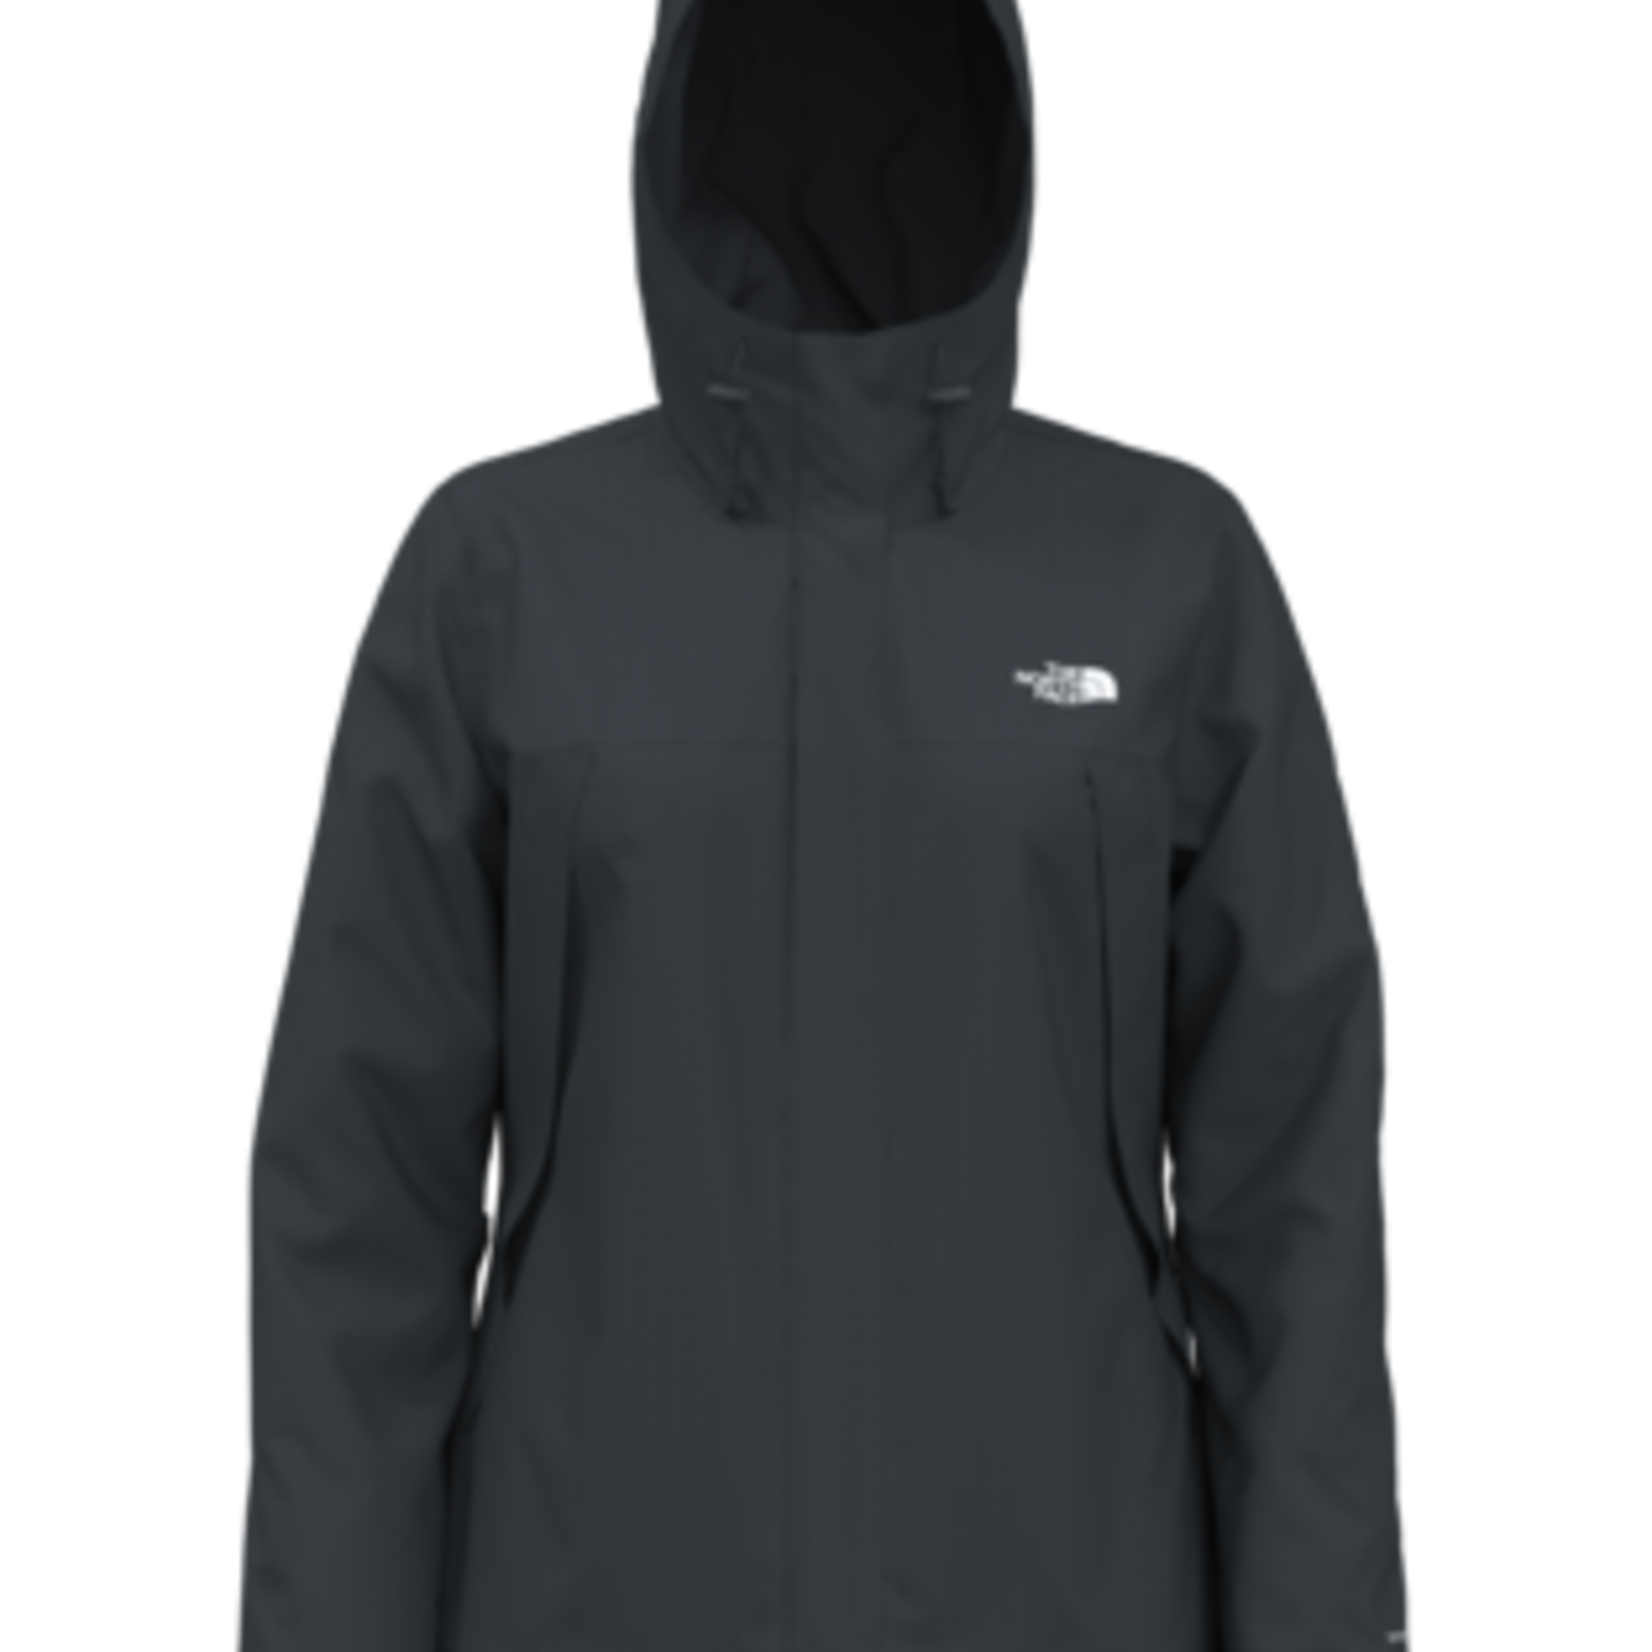 The North Face The North Face Jacket, Antora, Ladies